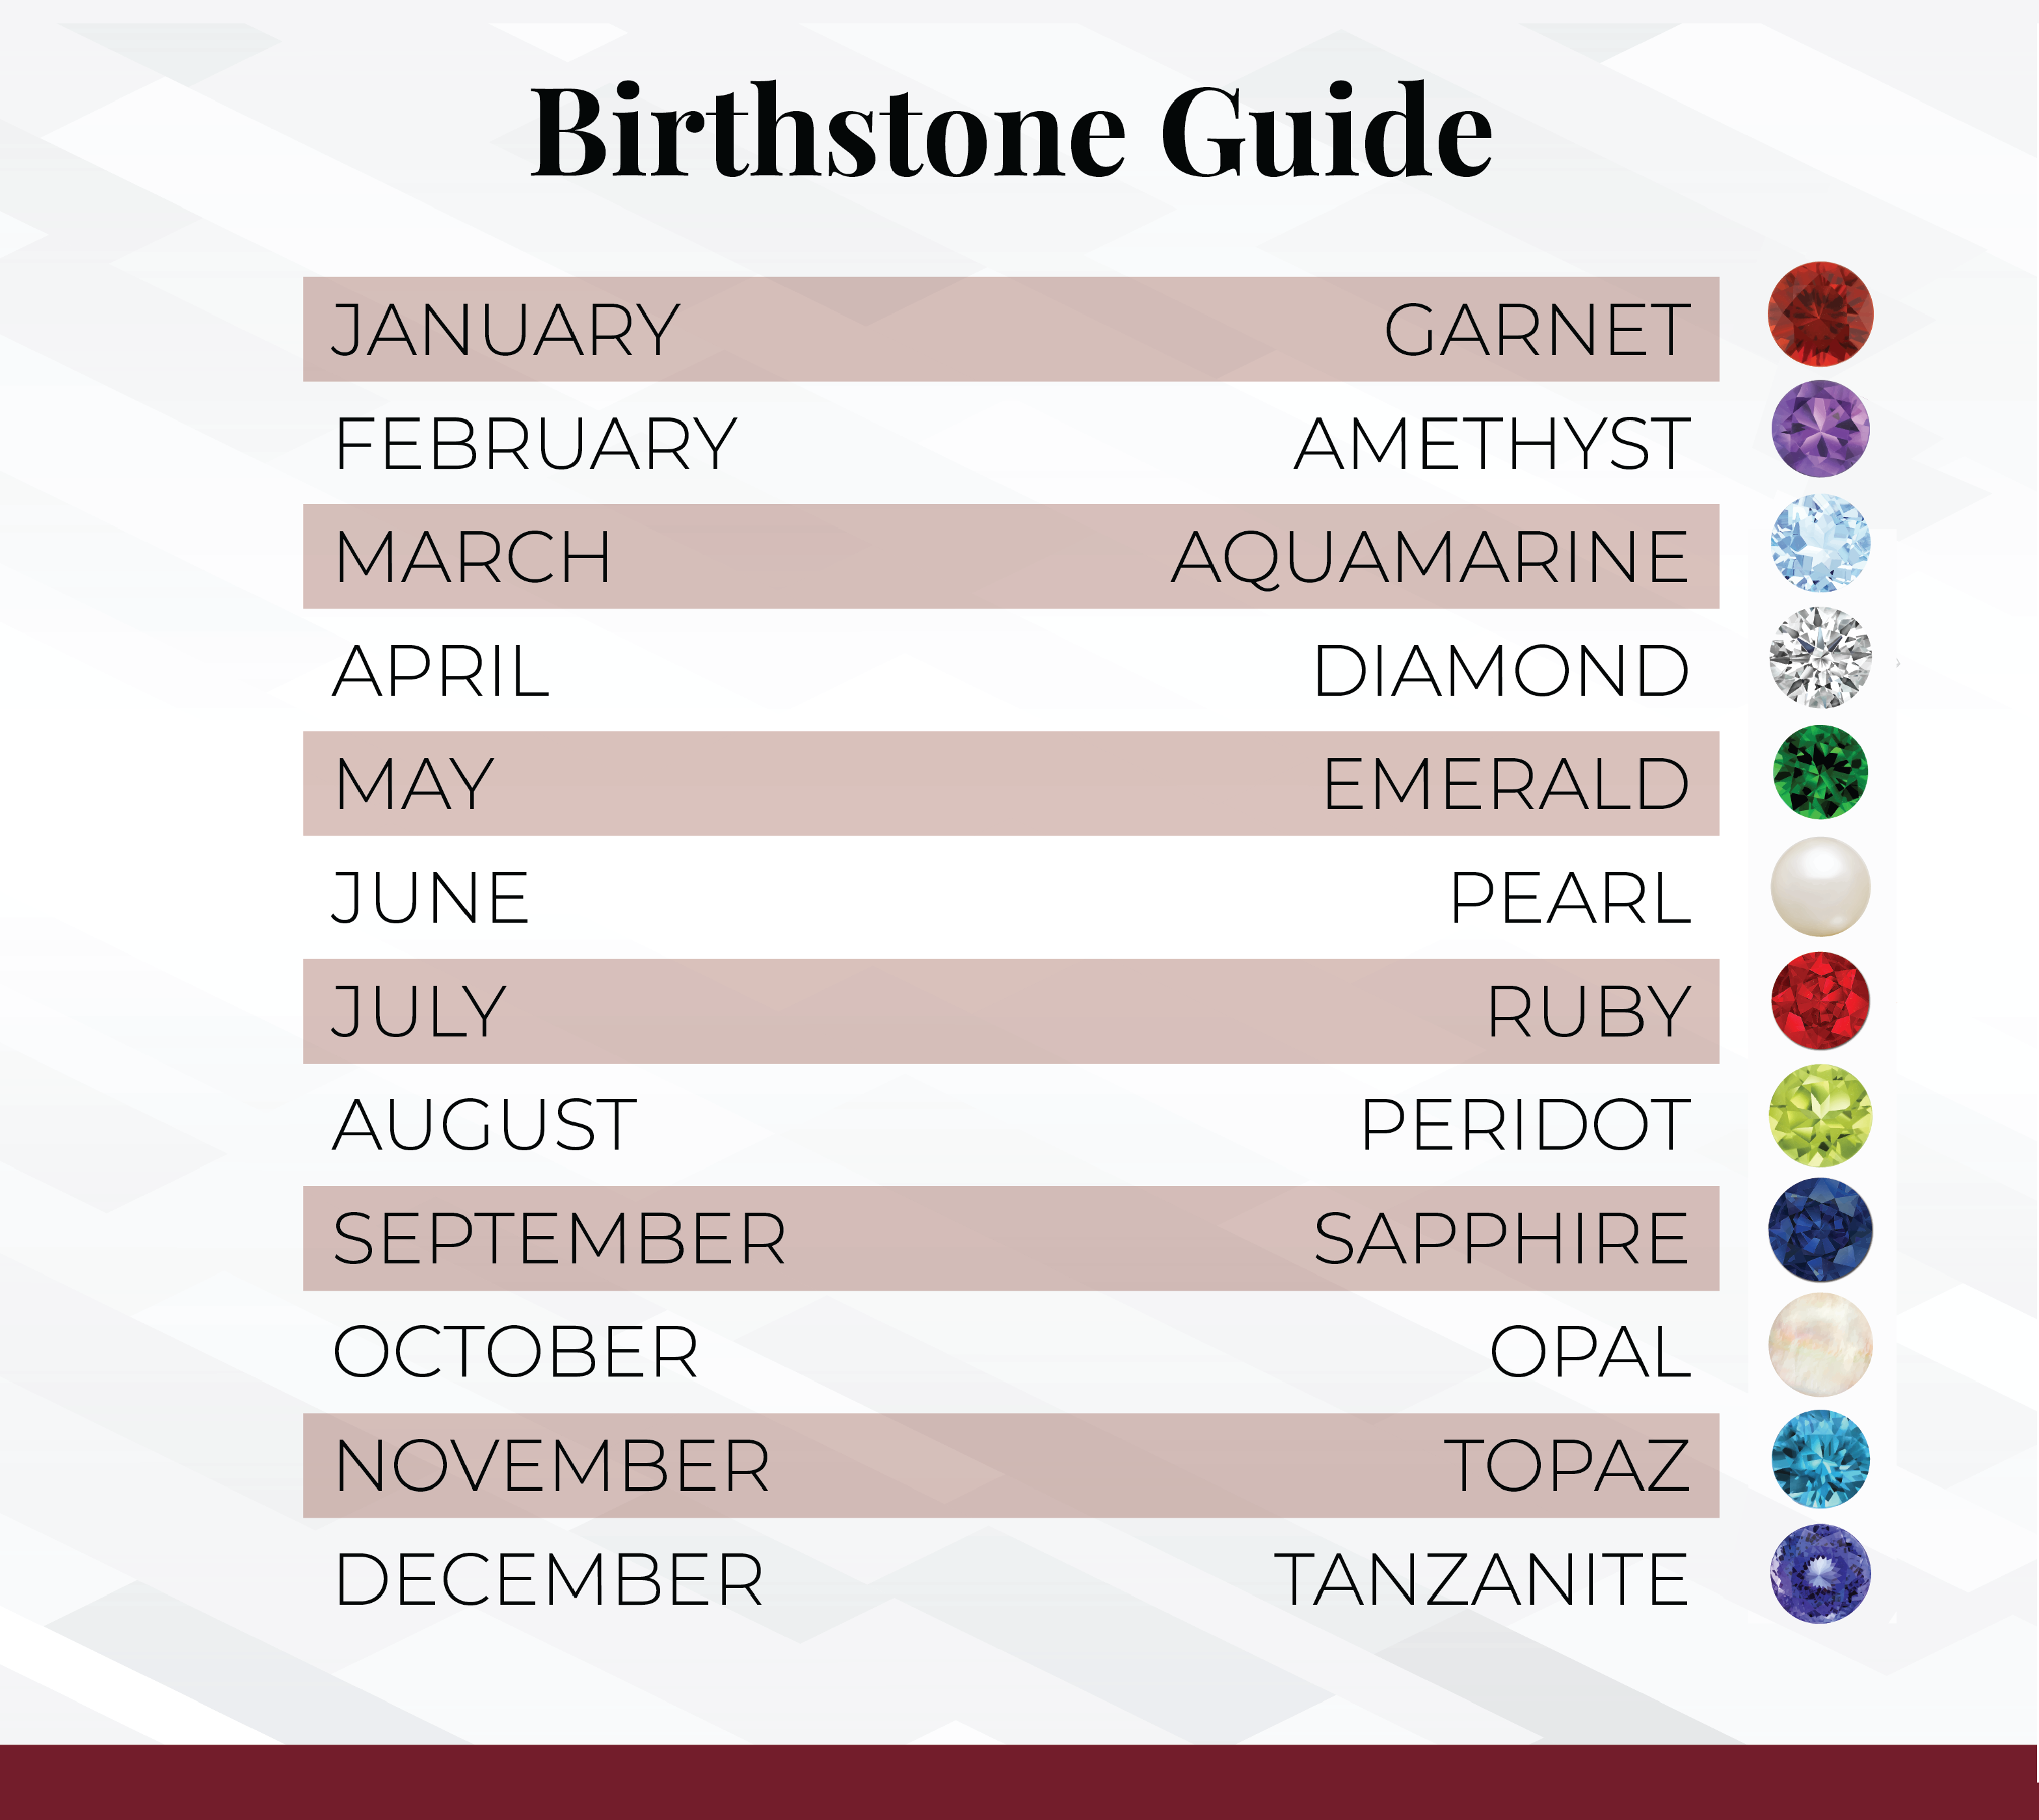 Birthstone Colors By Month And Their Meaning Ultimate Guide For Gemstone Lovers Vlr eng br